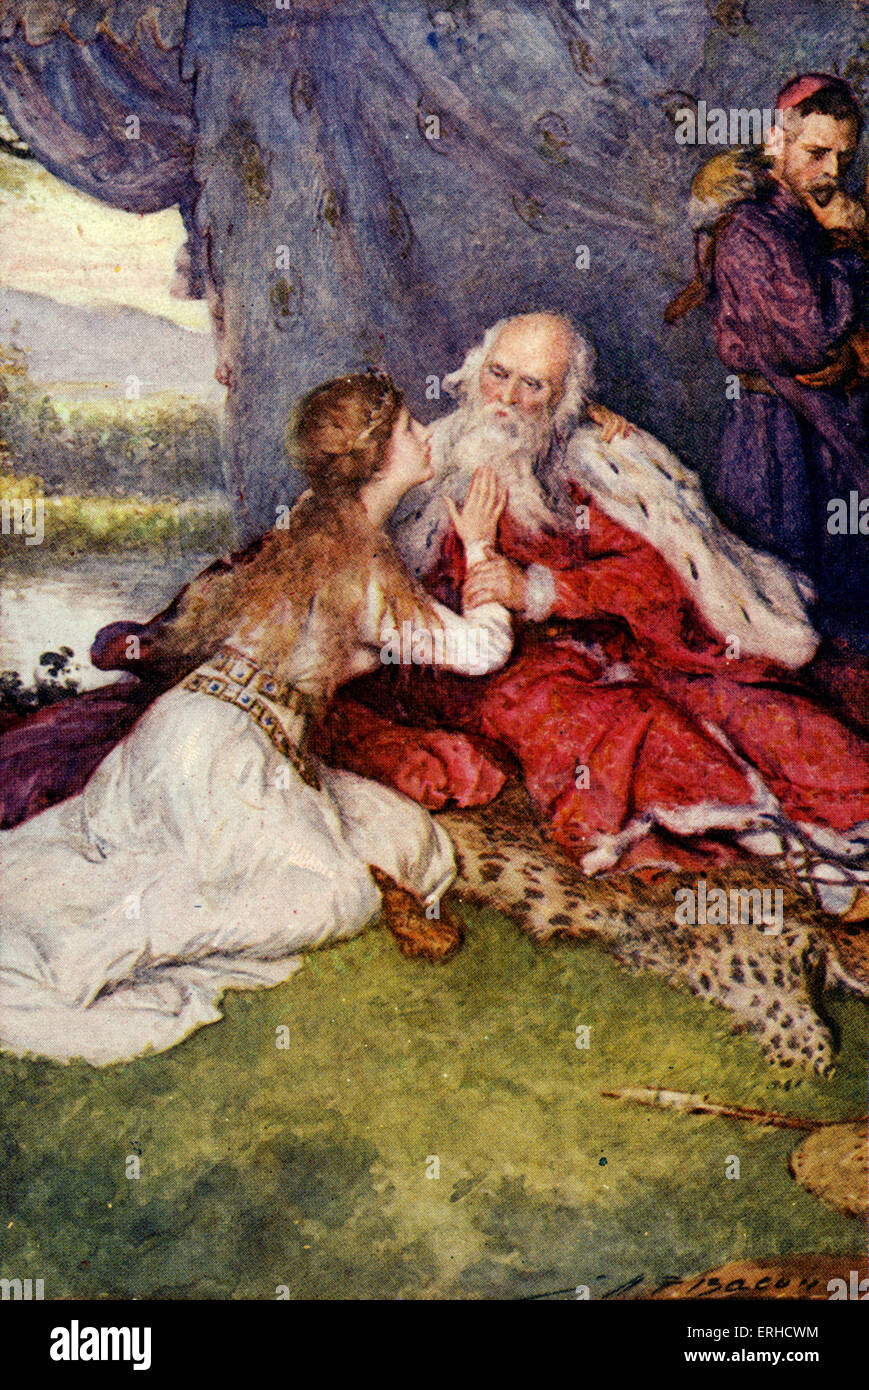 William SHAKESPEARE - KING LEAR scene Act IV, Sc vii 'I am a very foolish, fond old man'.  Lear with Cordelia - also subject of Stock Photo